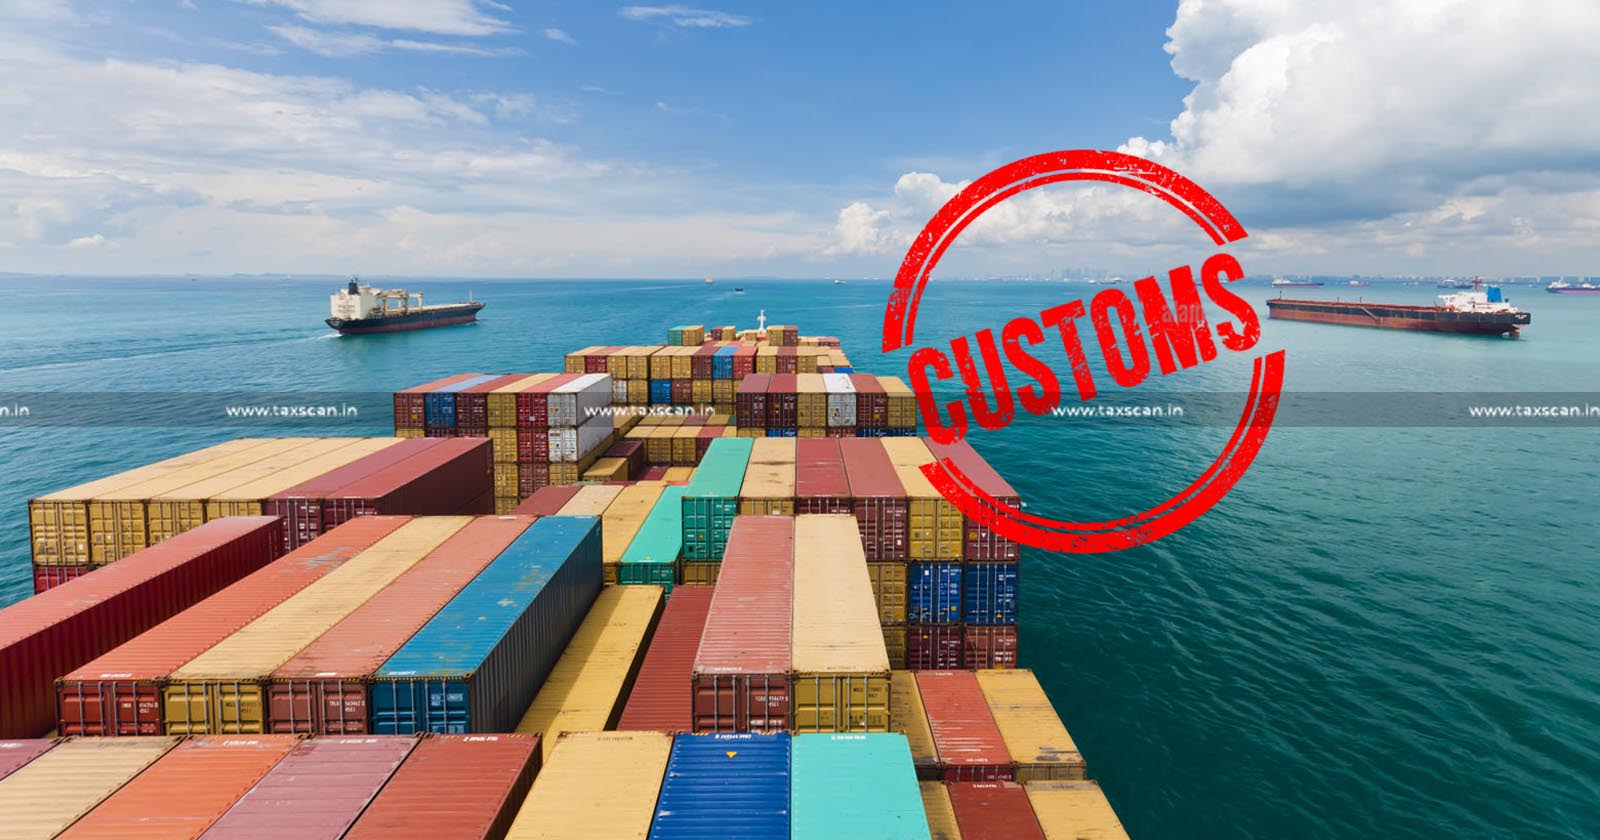 Finance Ministry - Finance Ministry notifies updated Customs Exchange Rate - Customs Exchange Rate - Import and Export of Goods - Export of Goods - Taxscan